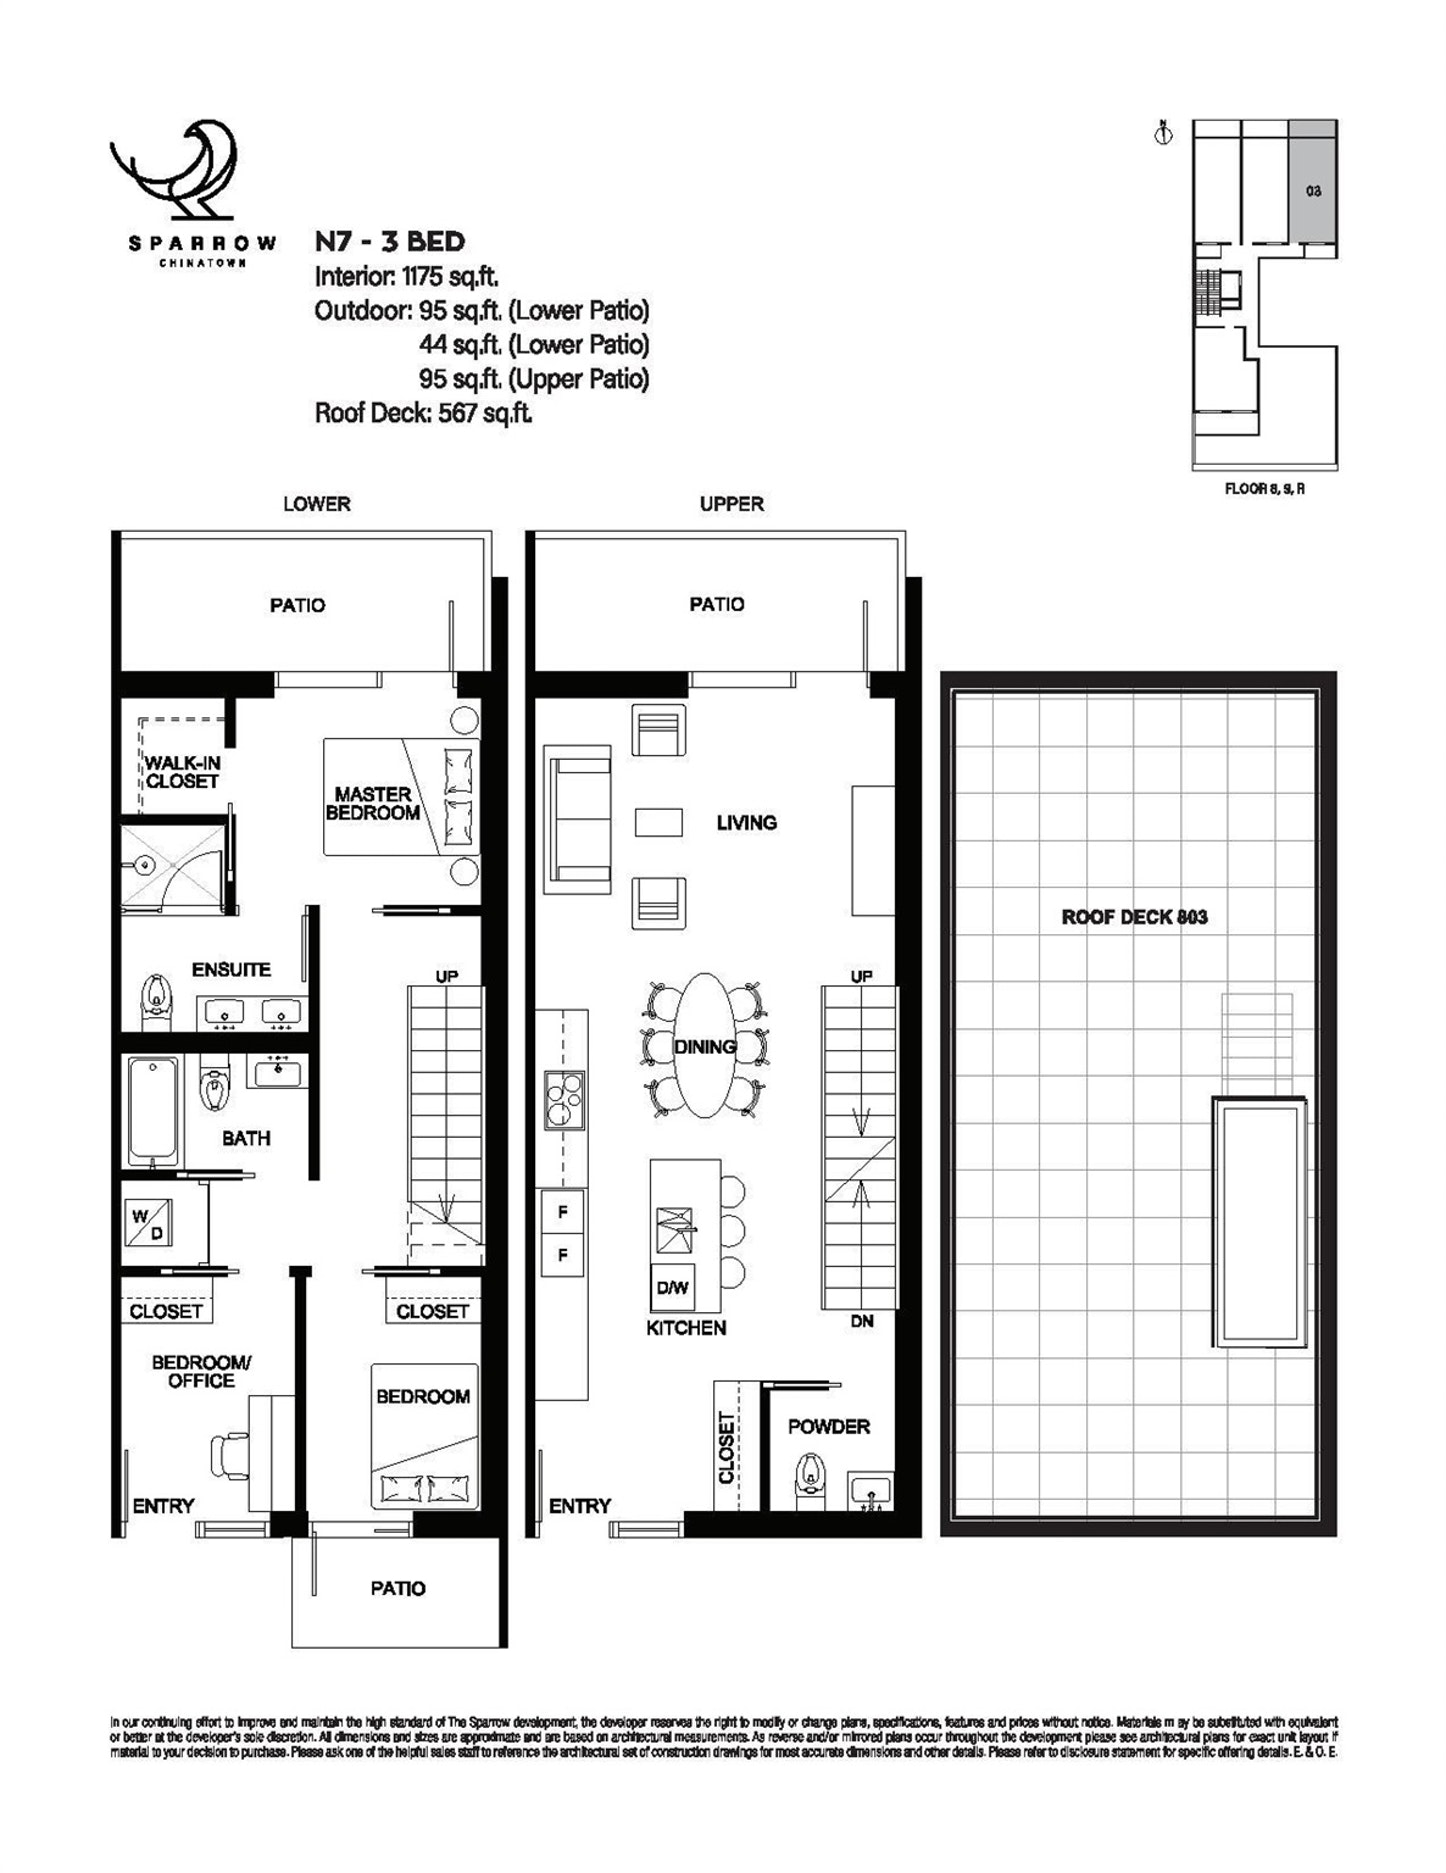 803 Floor Plan of Sparrow Condos with undefined beds